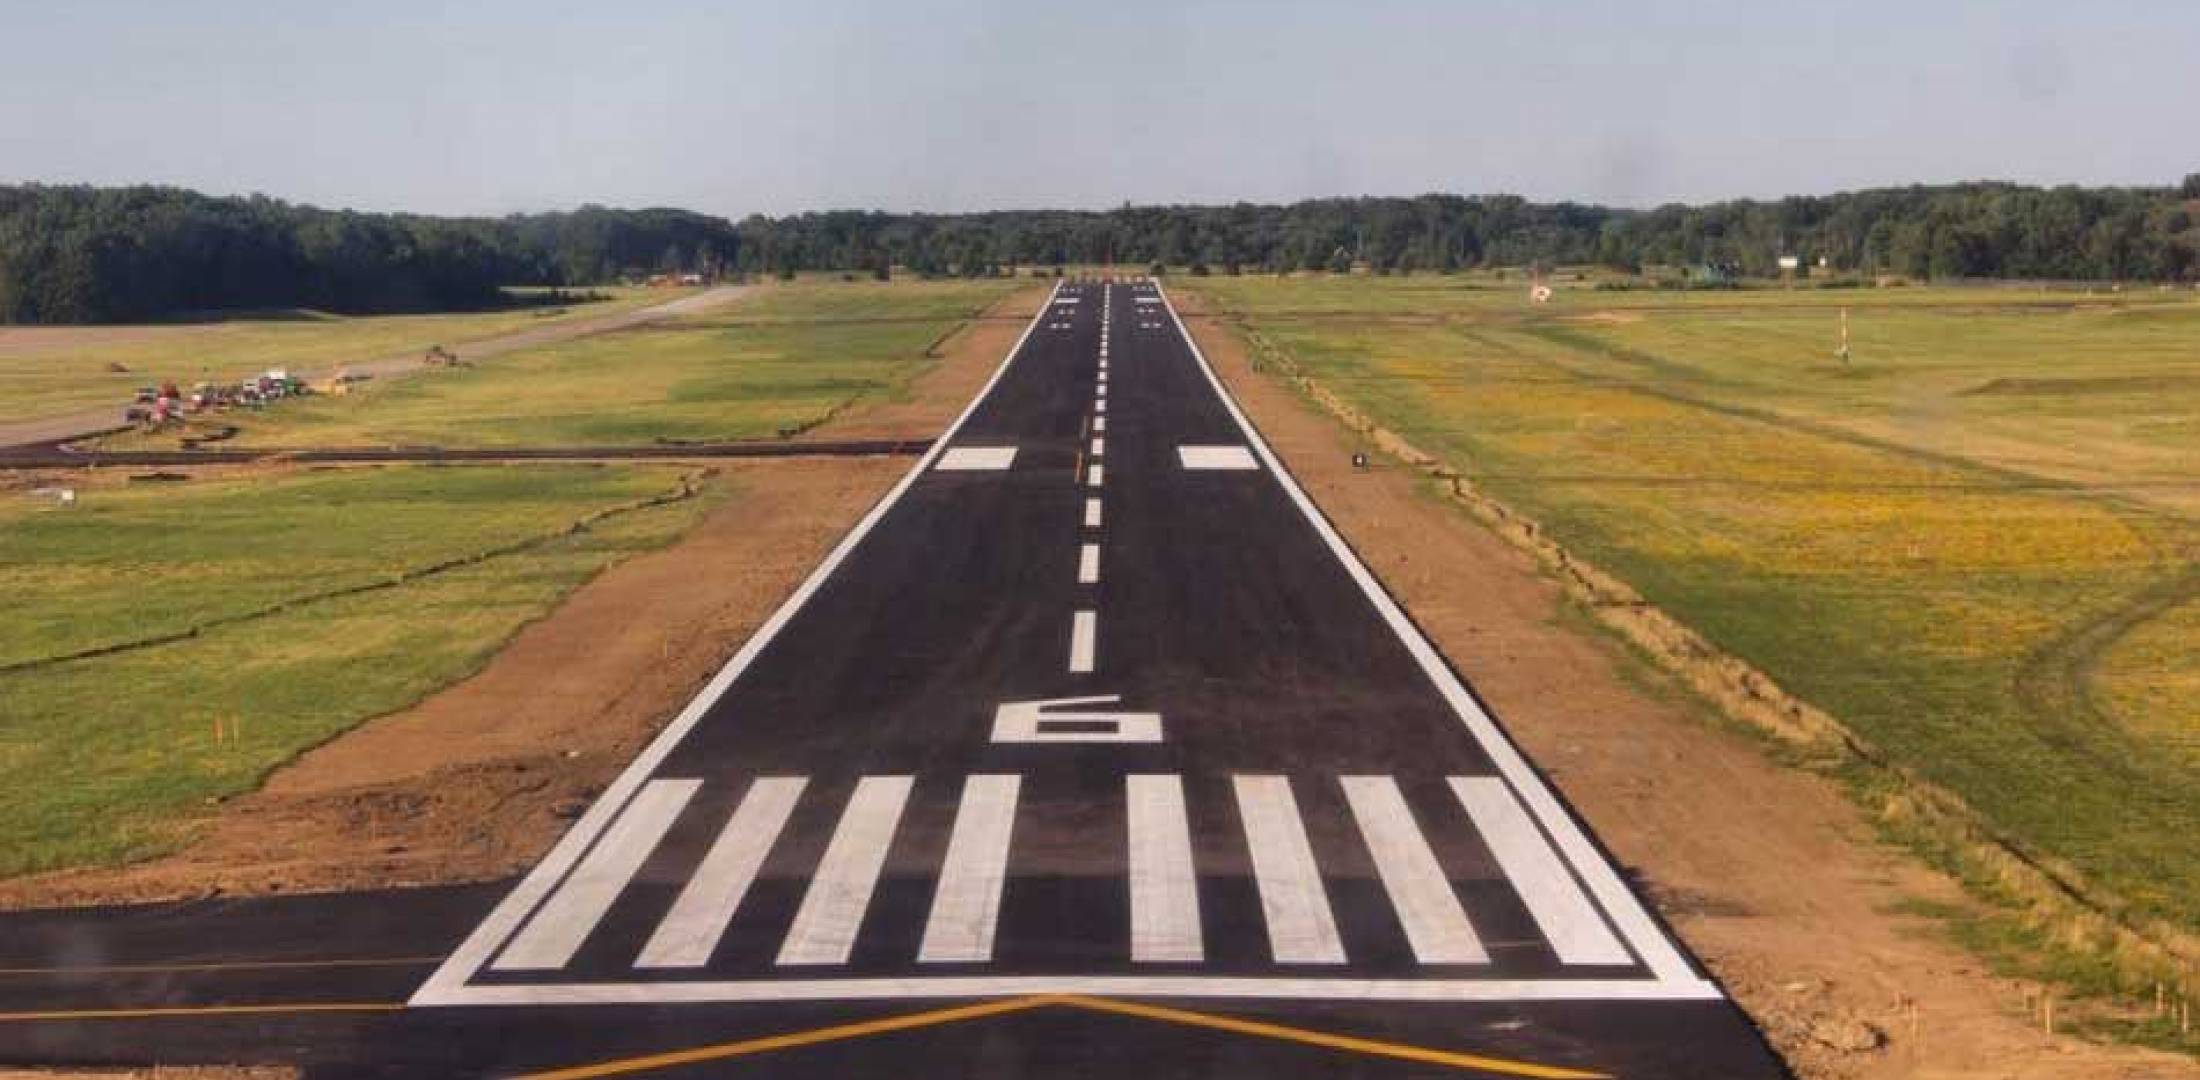 Cuyahoga County Airport To Reopen after Runway Project. Business Aviation News: Aviation International News